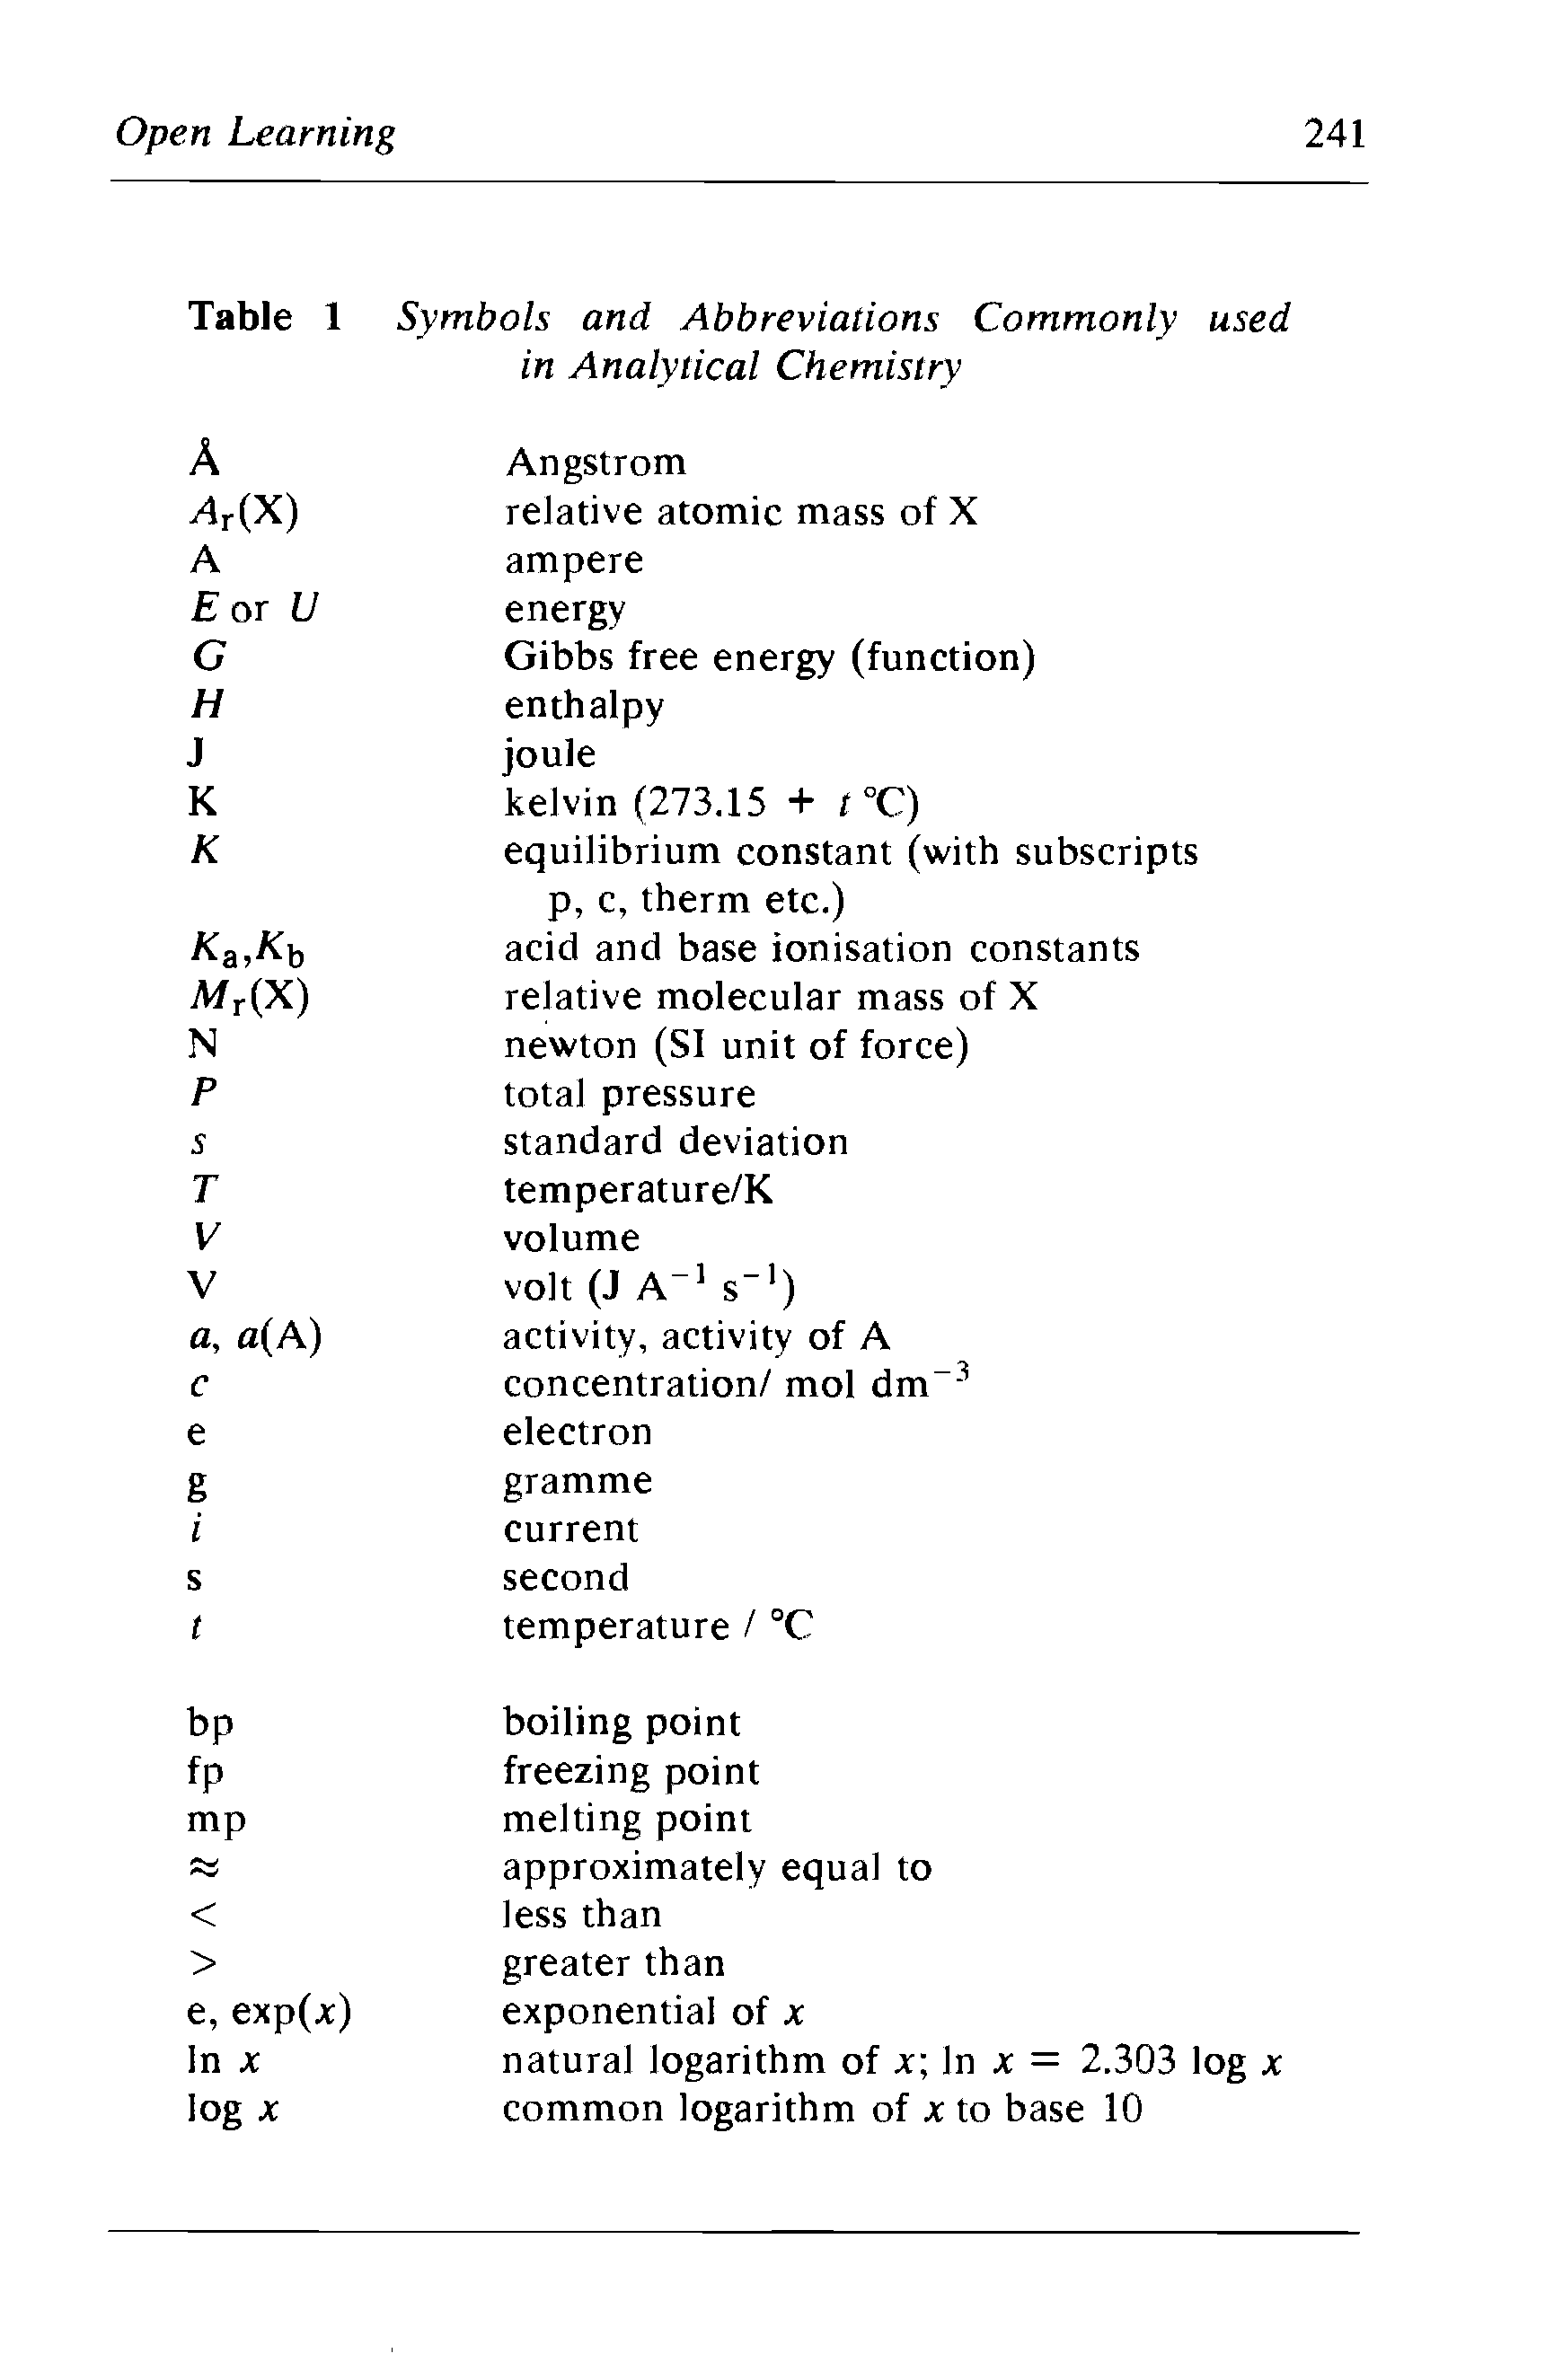 Table 1 Symbols and Abbreviations Commonly used in Analytical Chemistry...